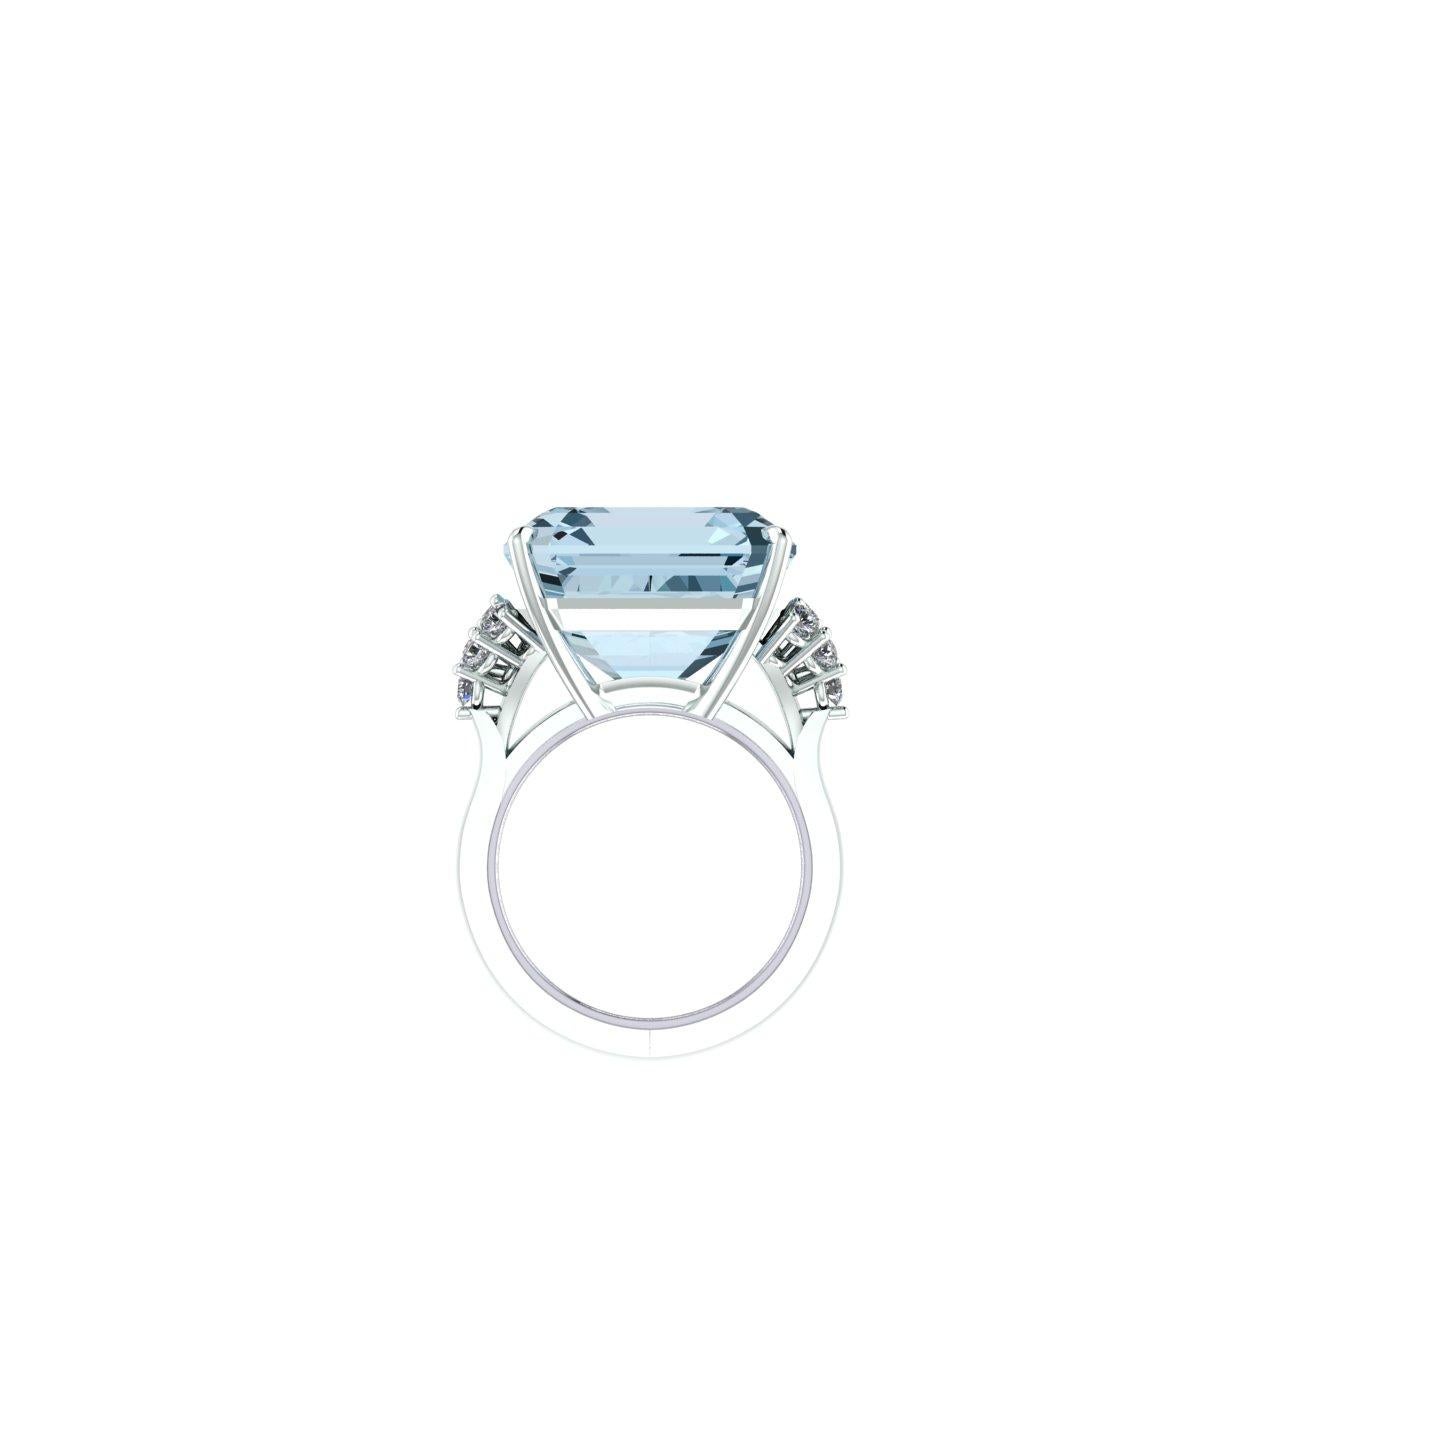 24.02 carats Natural Aquamarine, Setting in Platinum 950, side diamonds 0.36 carat G/F color, VS clarity,
setting size 7 or customer's size upon confirmation
